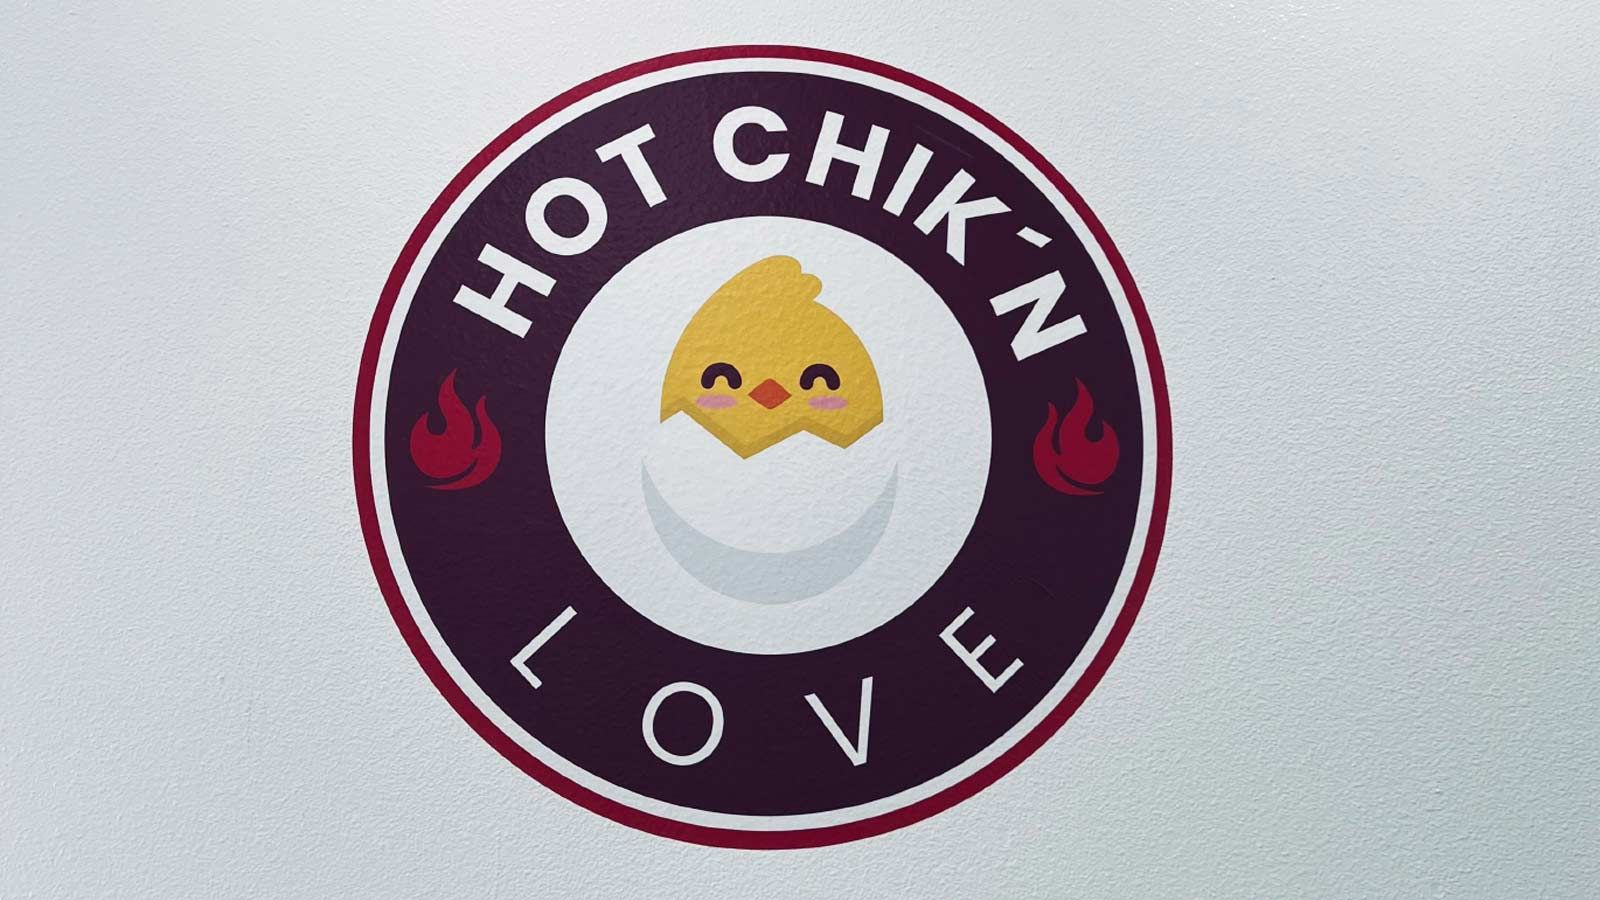 Hot chikn love personalized decal